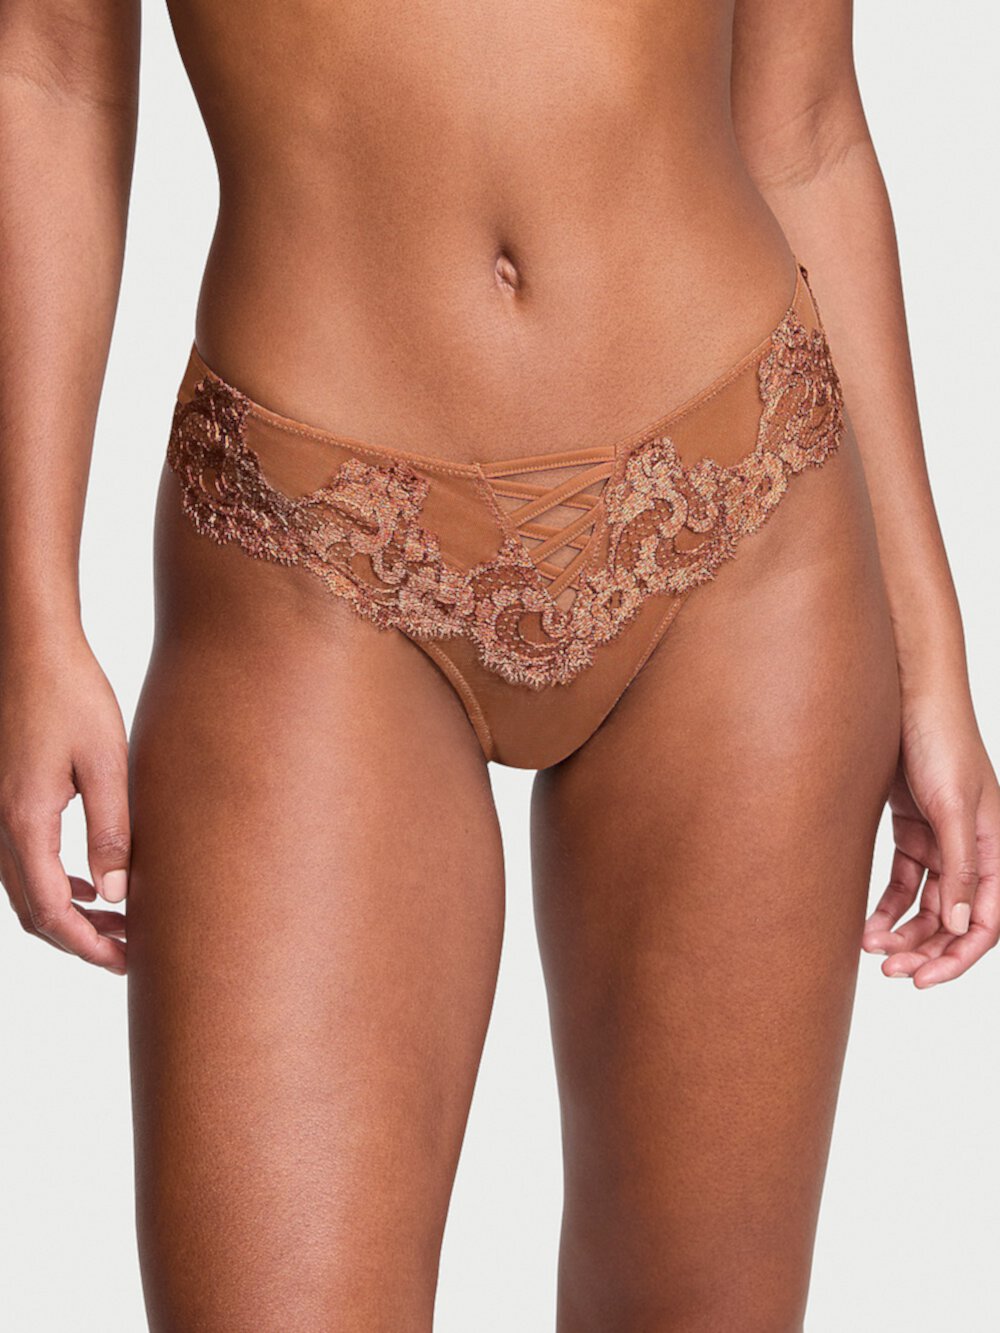 Boho Floral Embroidery Brazilian Panty Dream Angels